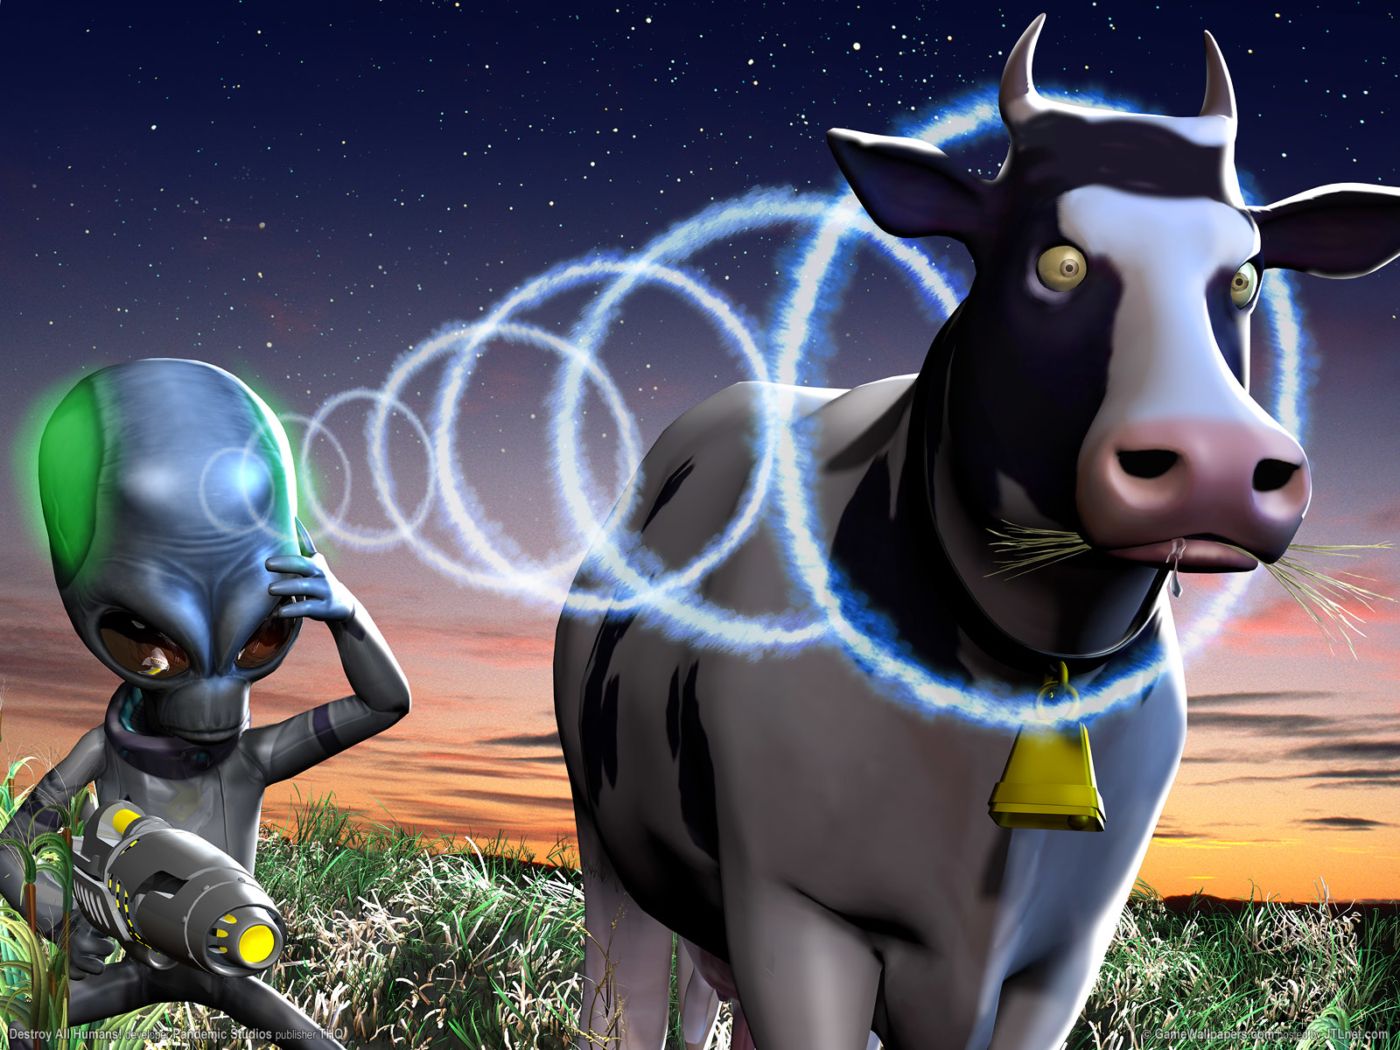 Destroy All Humans! Remaster Coming To PlayStation 4 Soon